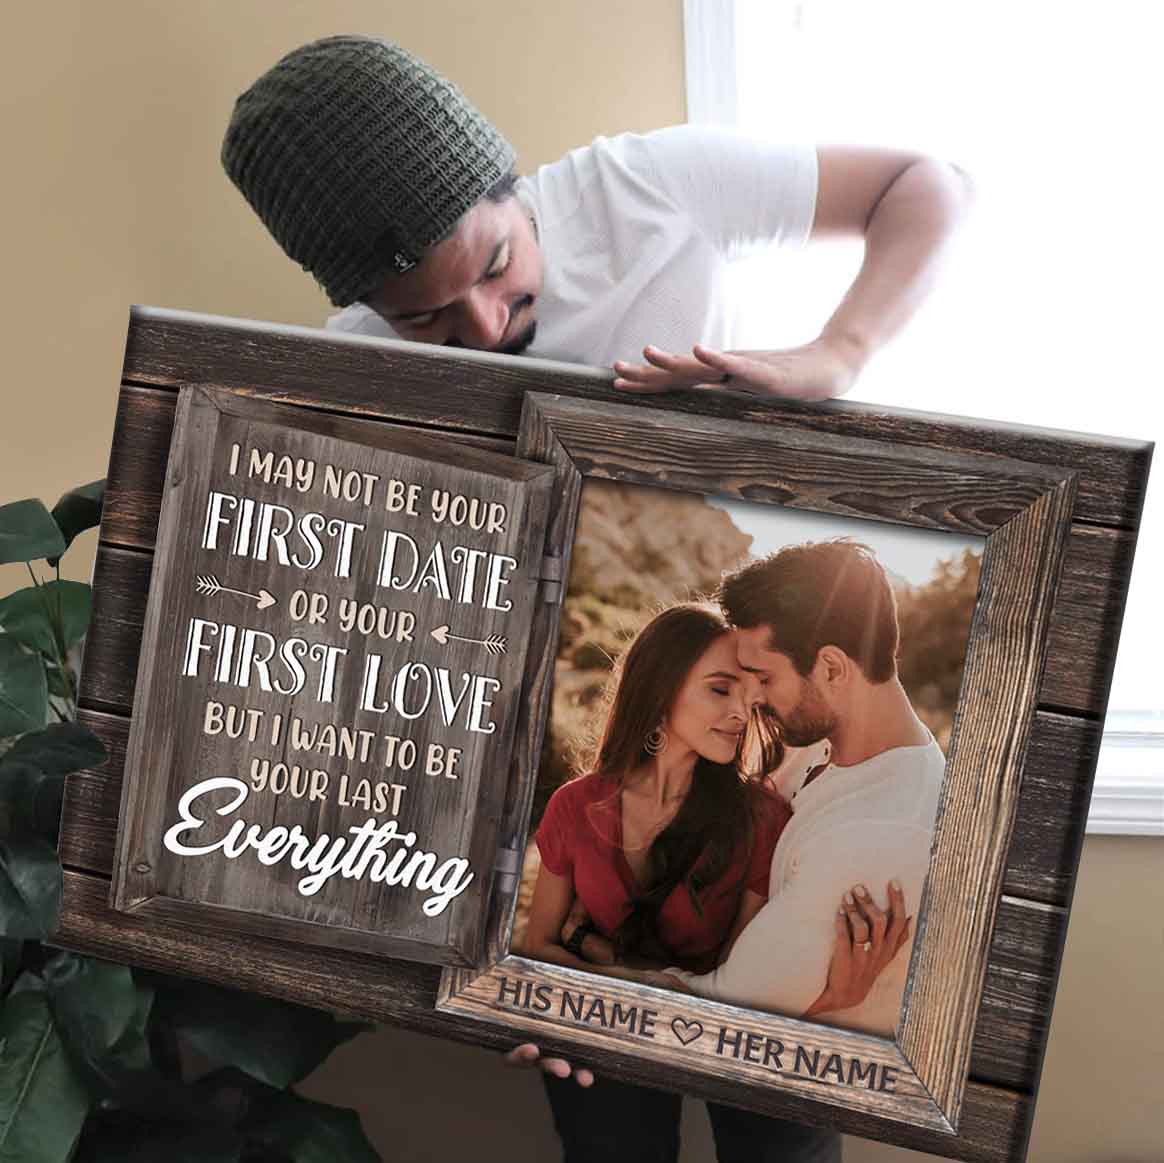 Be Your Last Everything - Premium Couple Canvas